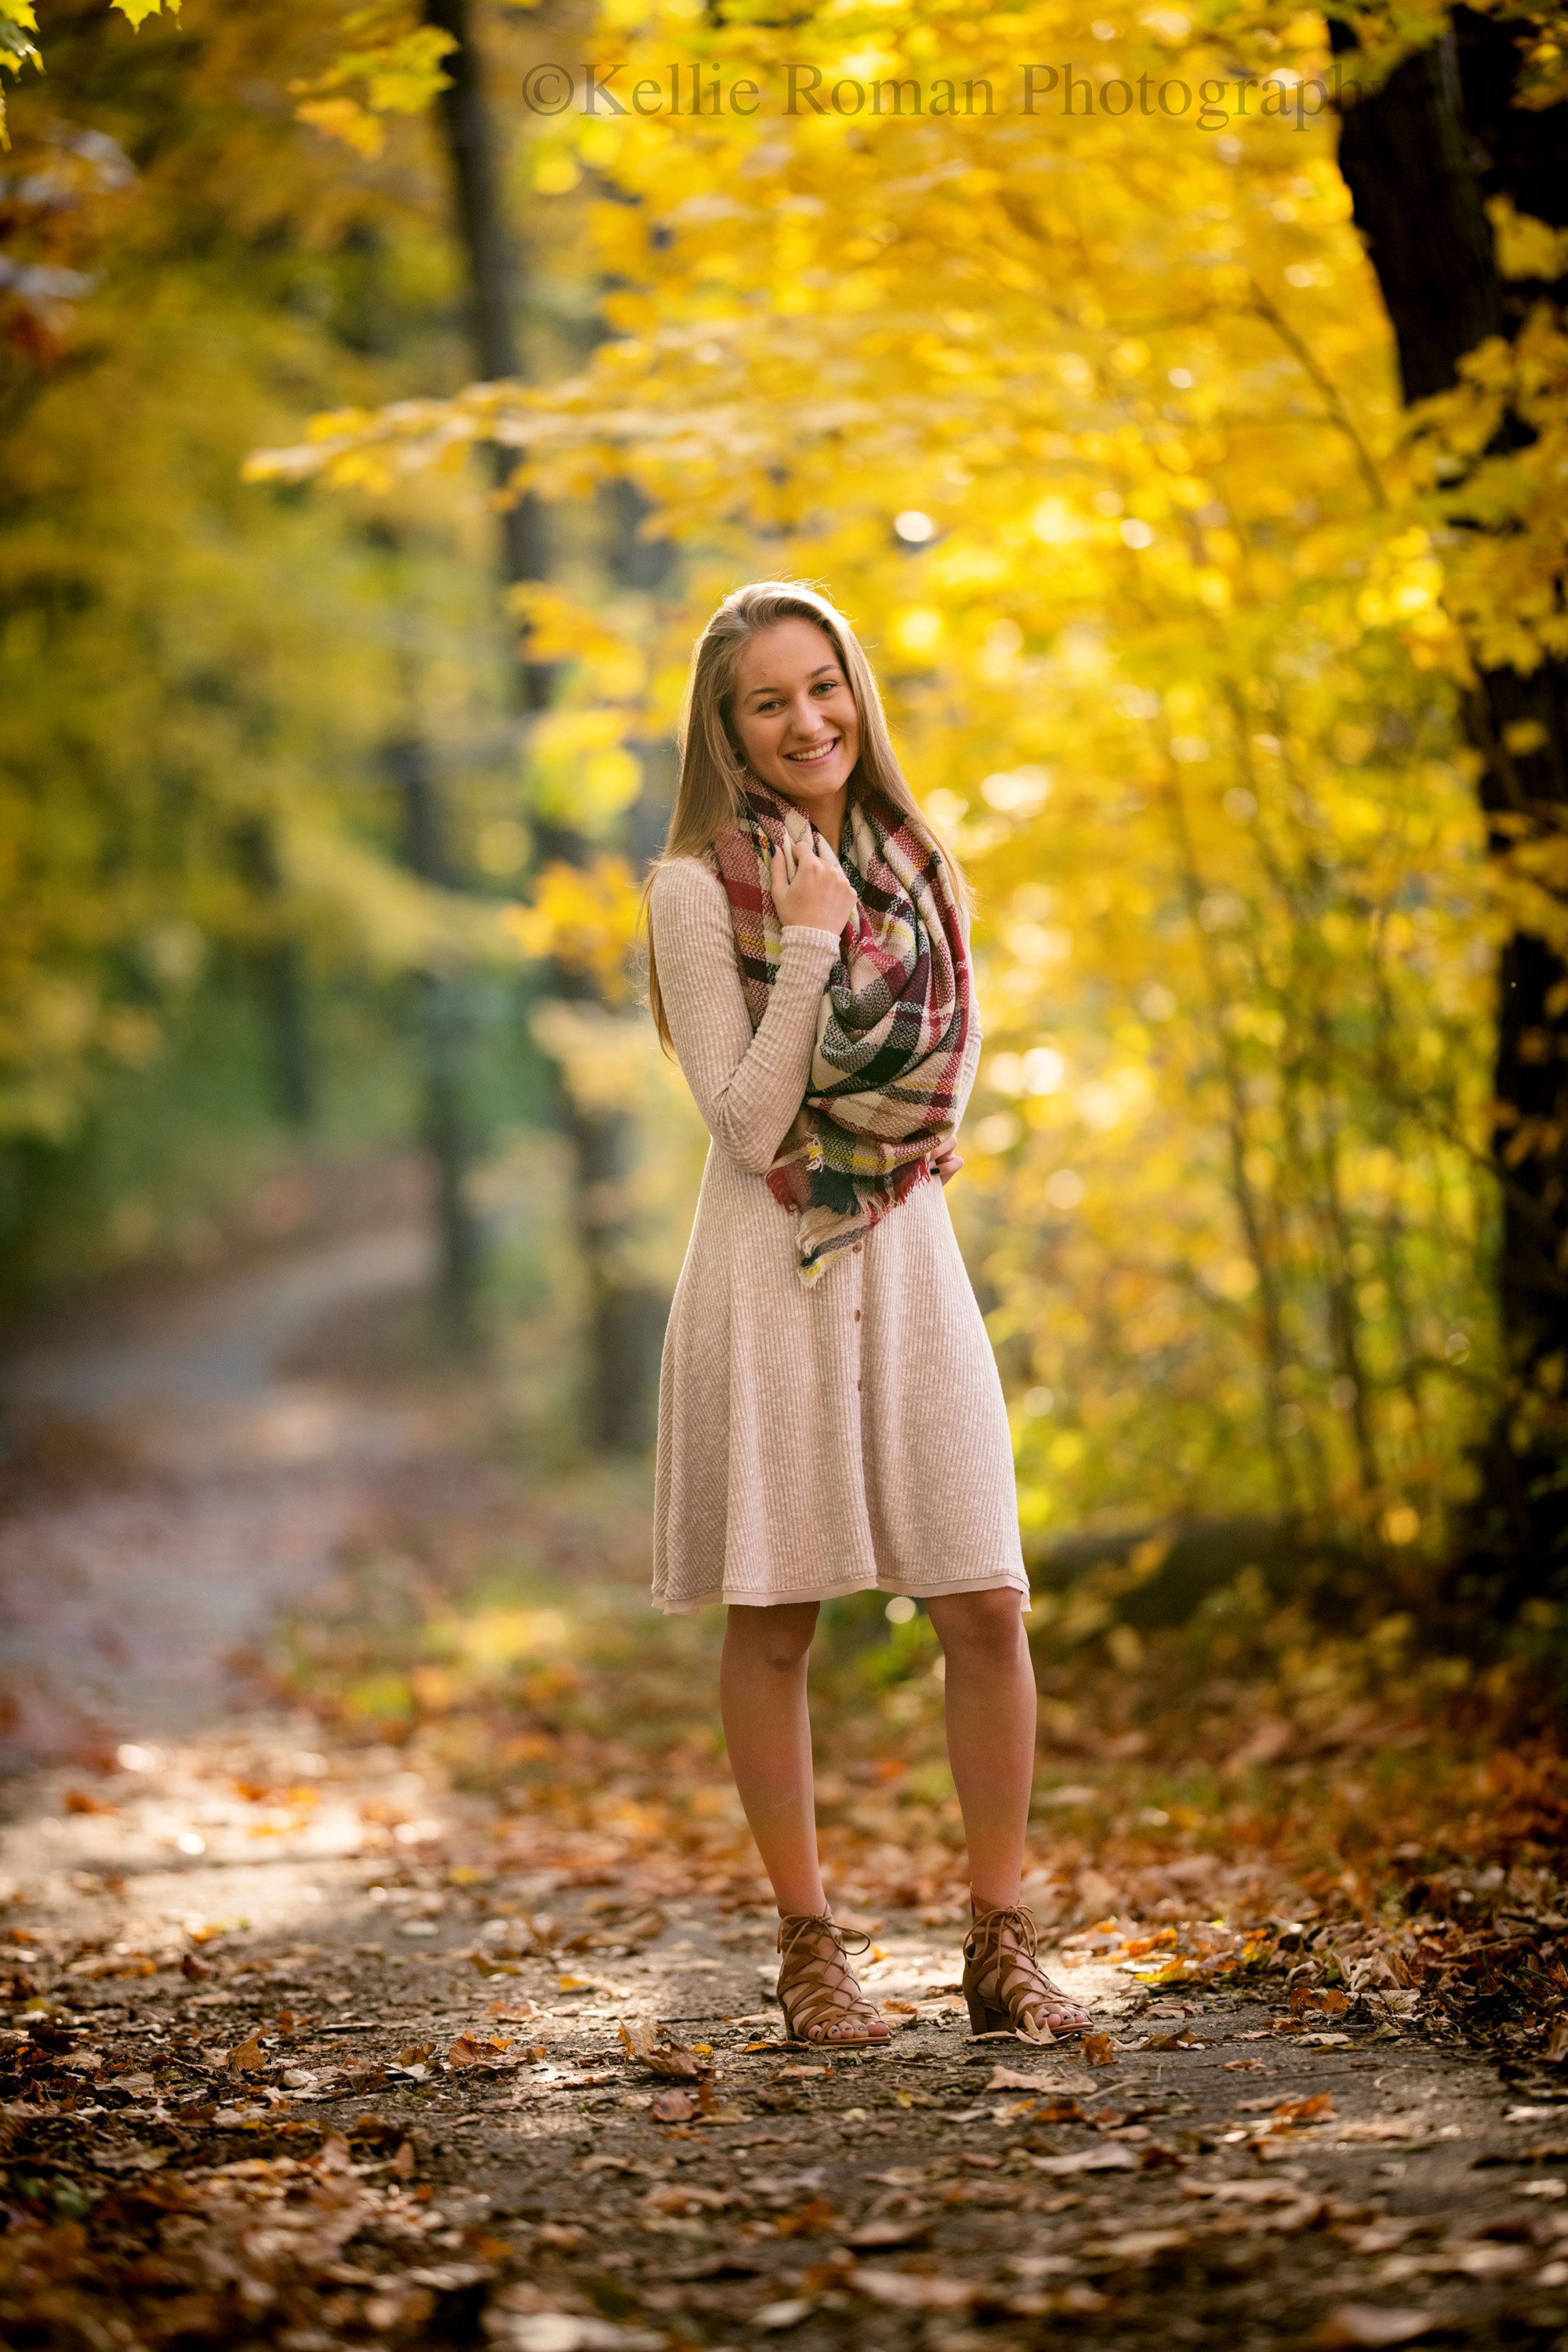 fall senior pics, a high school senior girl standing outside on a trail covered in yellow fall laves with yellow leaves and trees behind her. she's wearing a beige dress with a colored plaid scarf.